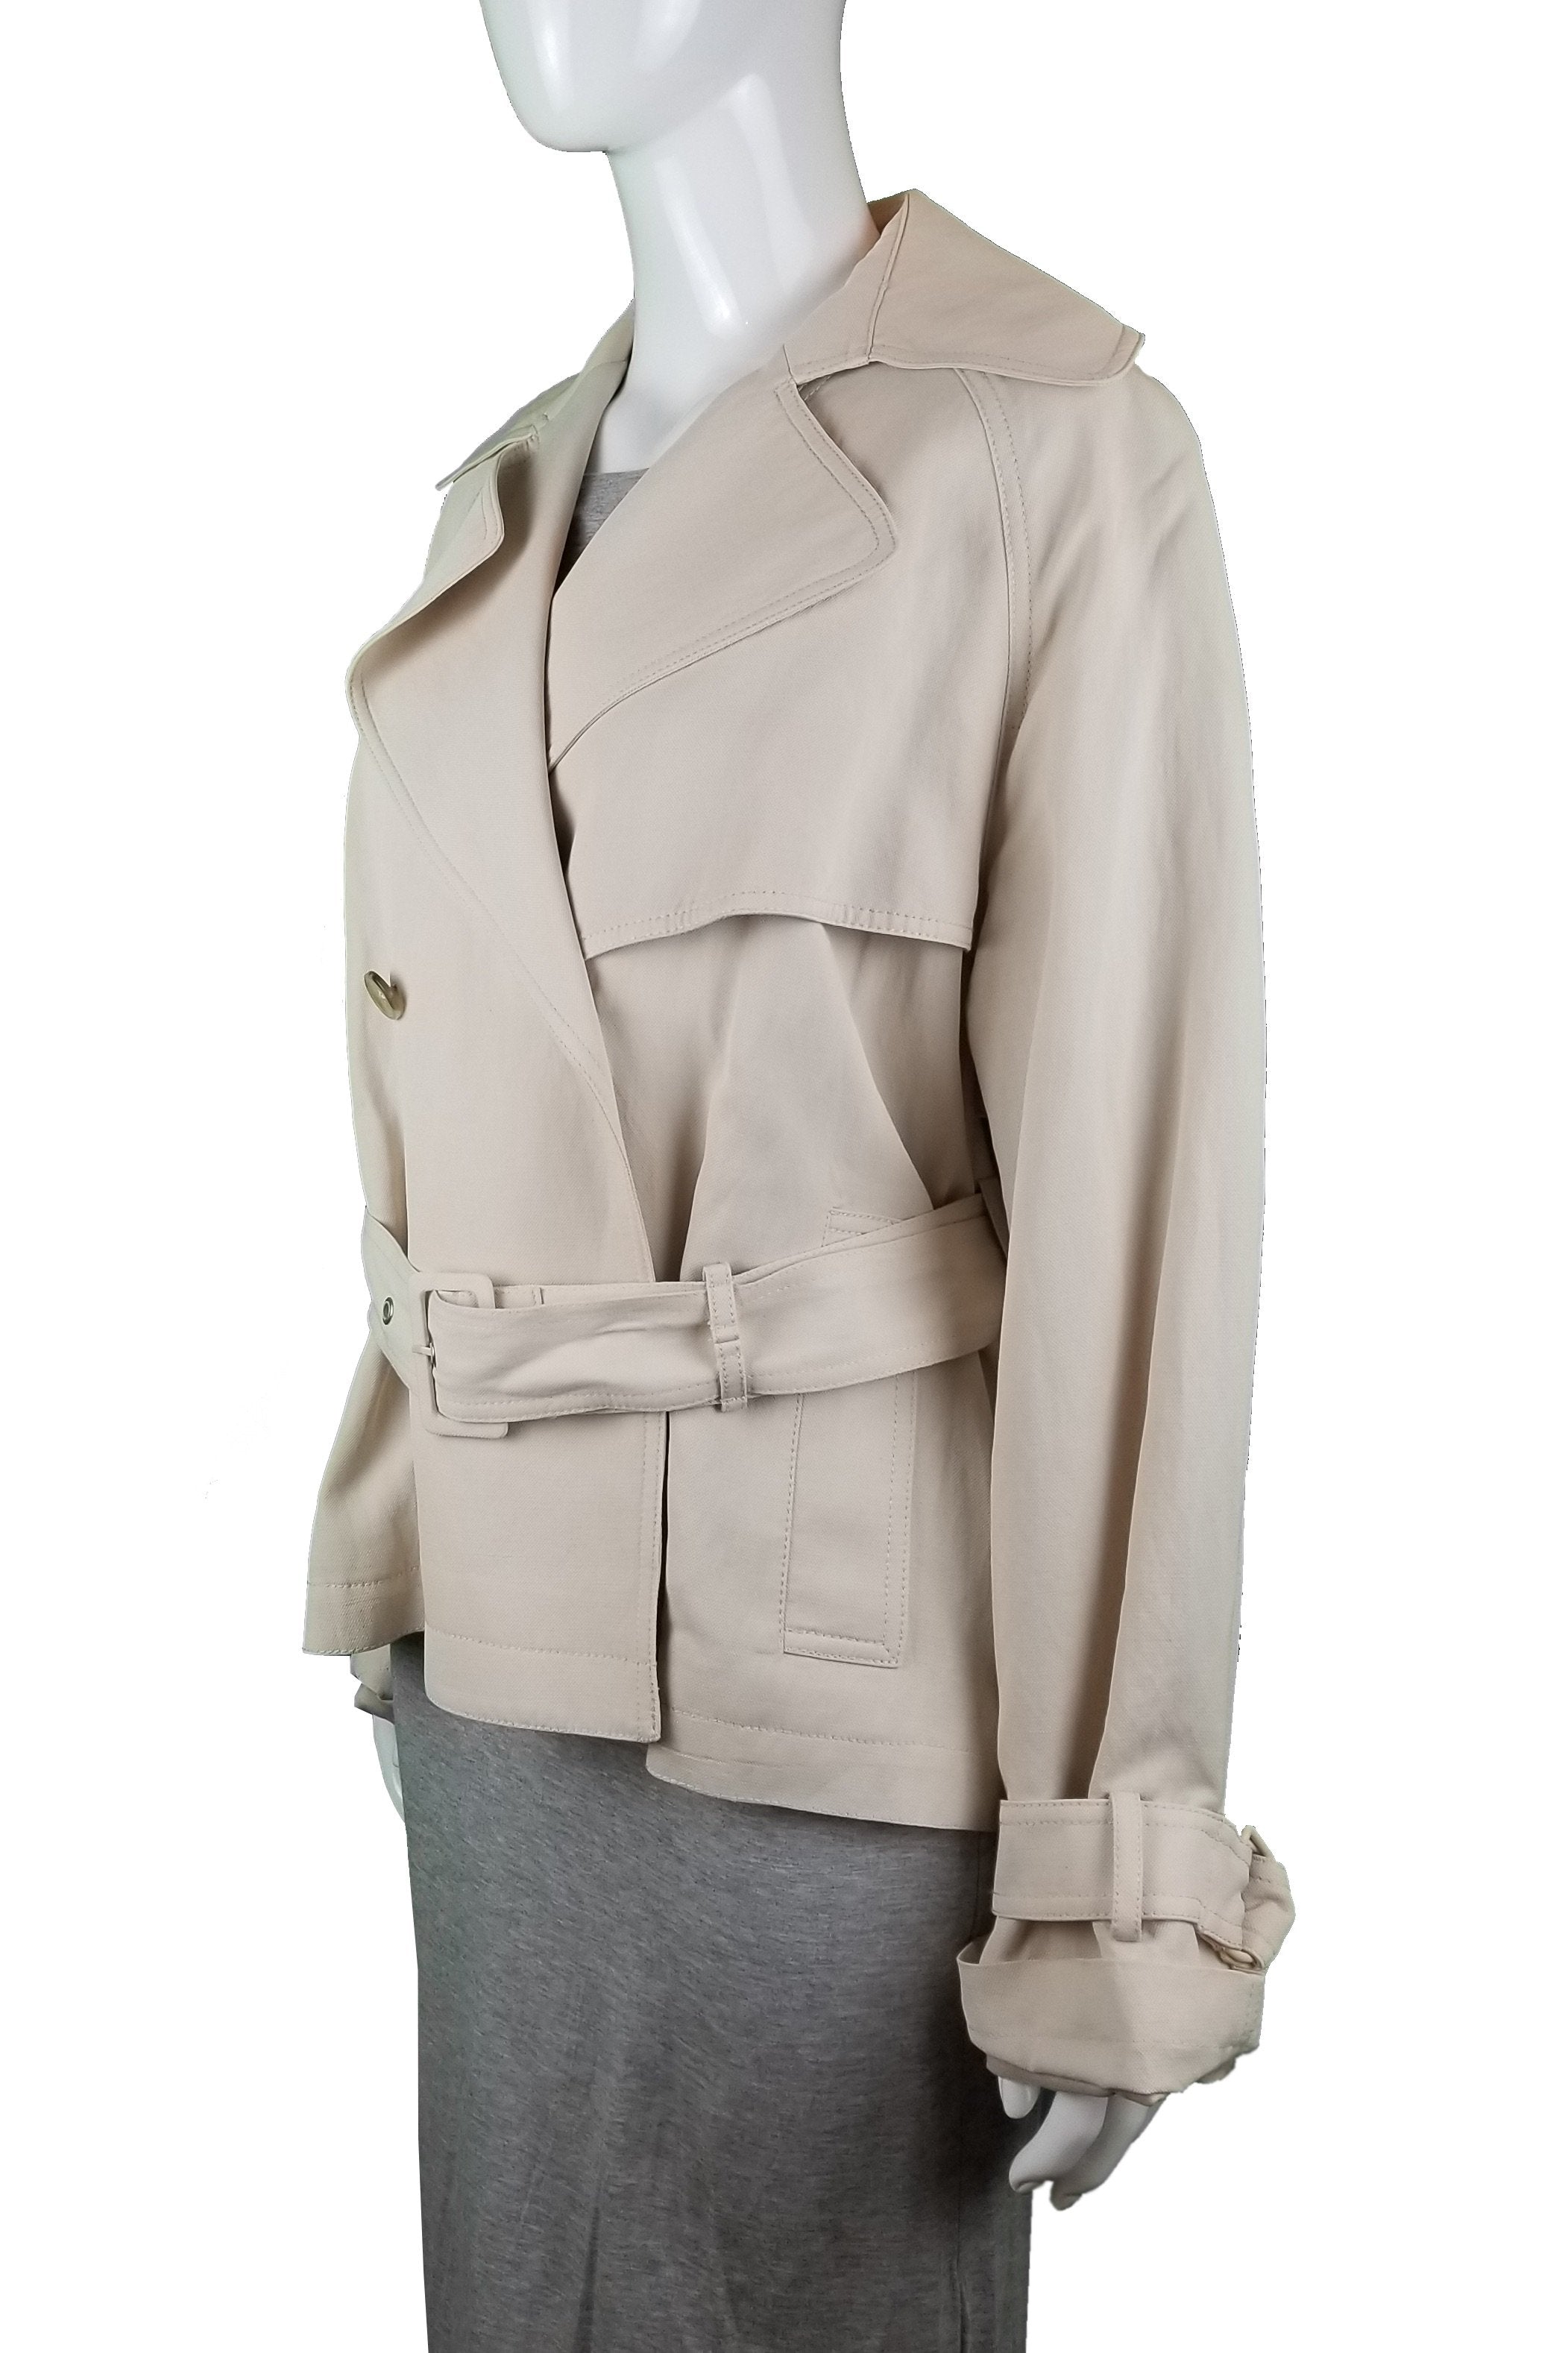 Vince Beige Fitted Jacket, Feel confident in this flattering design with soft and drapey material. , White, 58% Viscose, 23% Linen, 19% Cotton, women's jacket, women's work jacket, women's work blazer